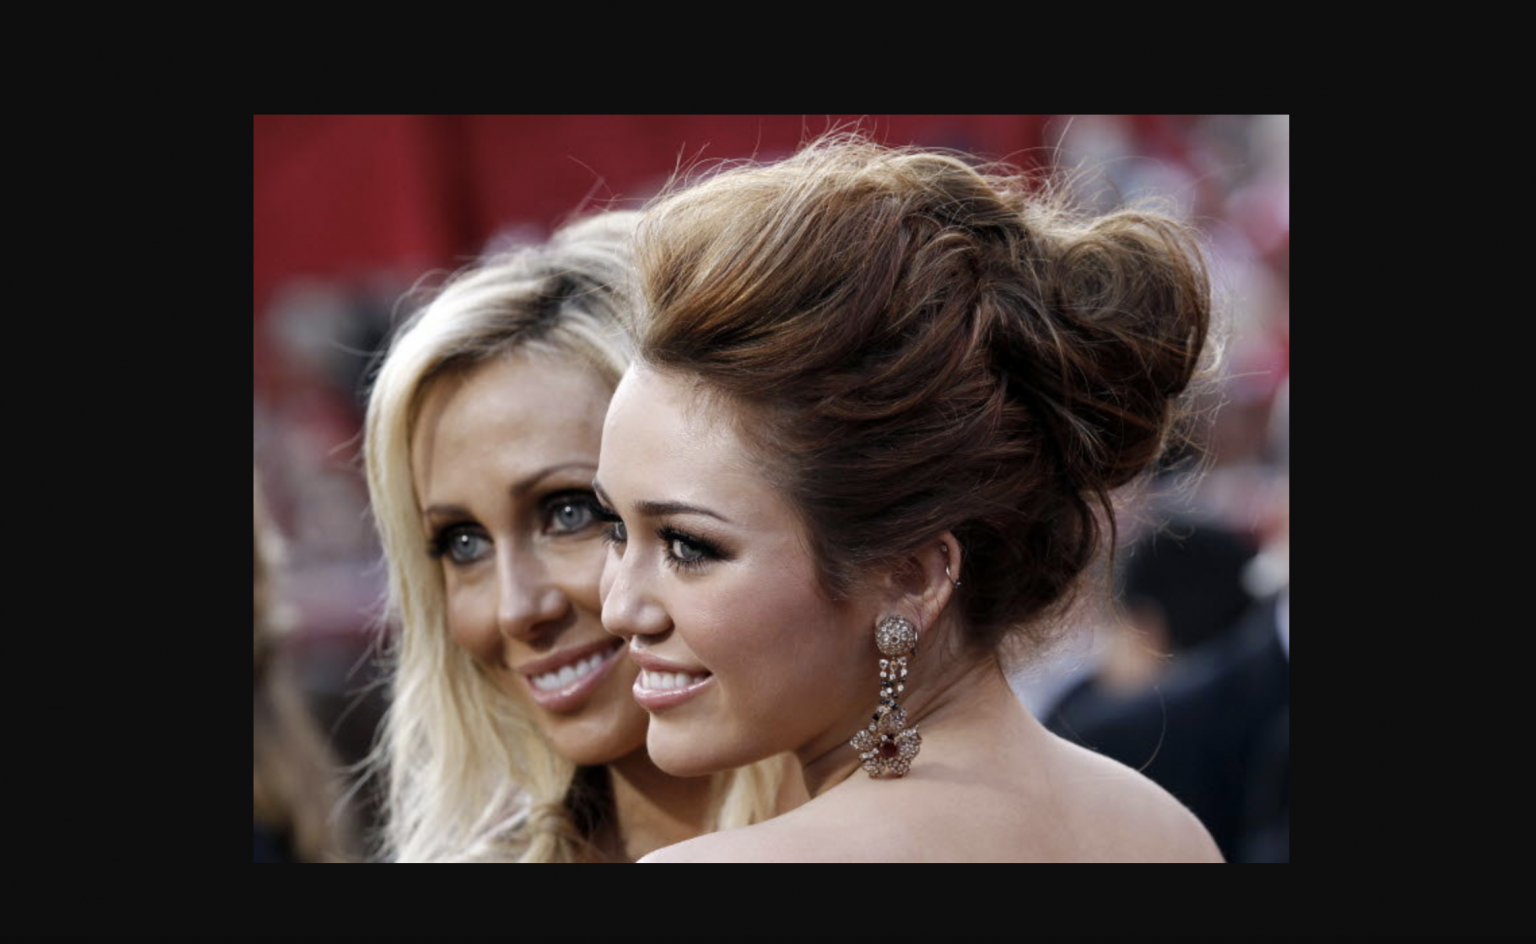 Tish and Miley Cyrus